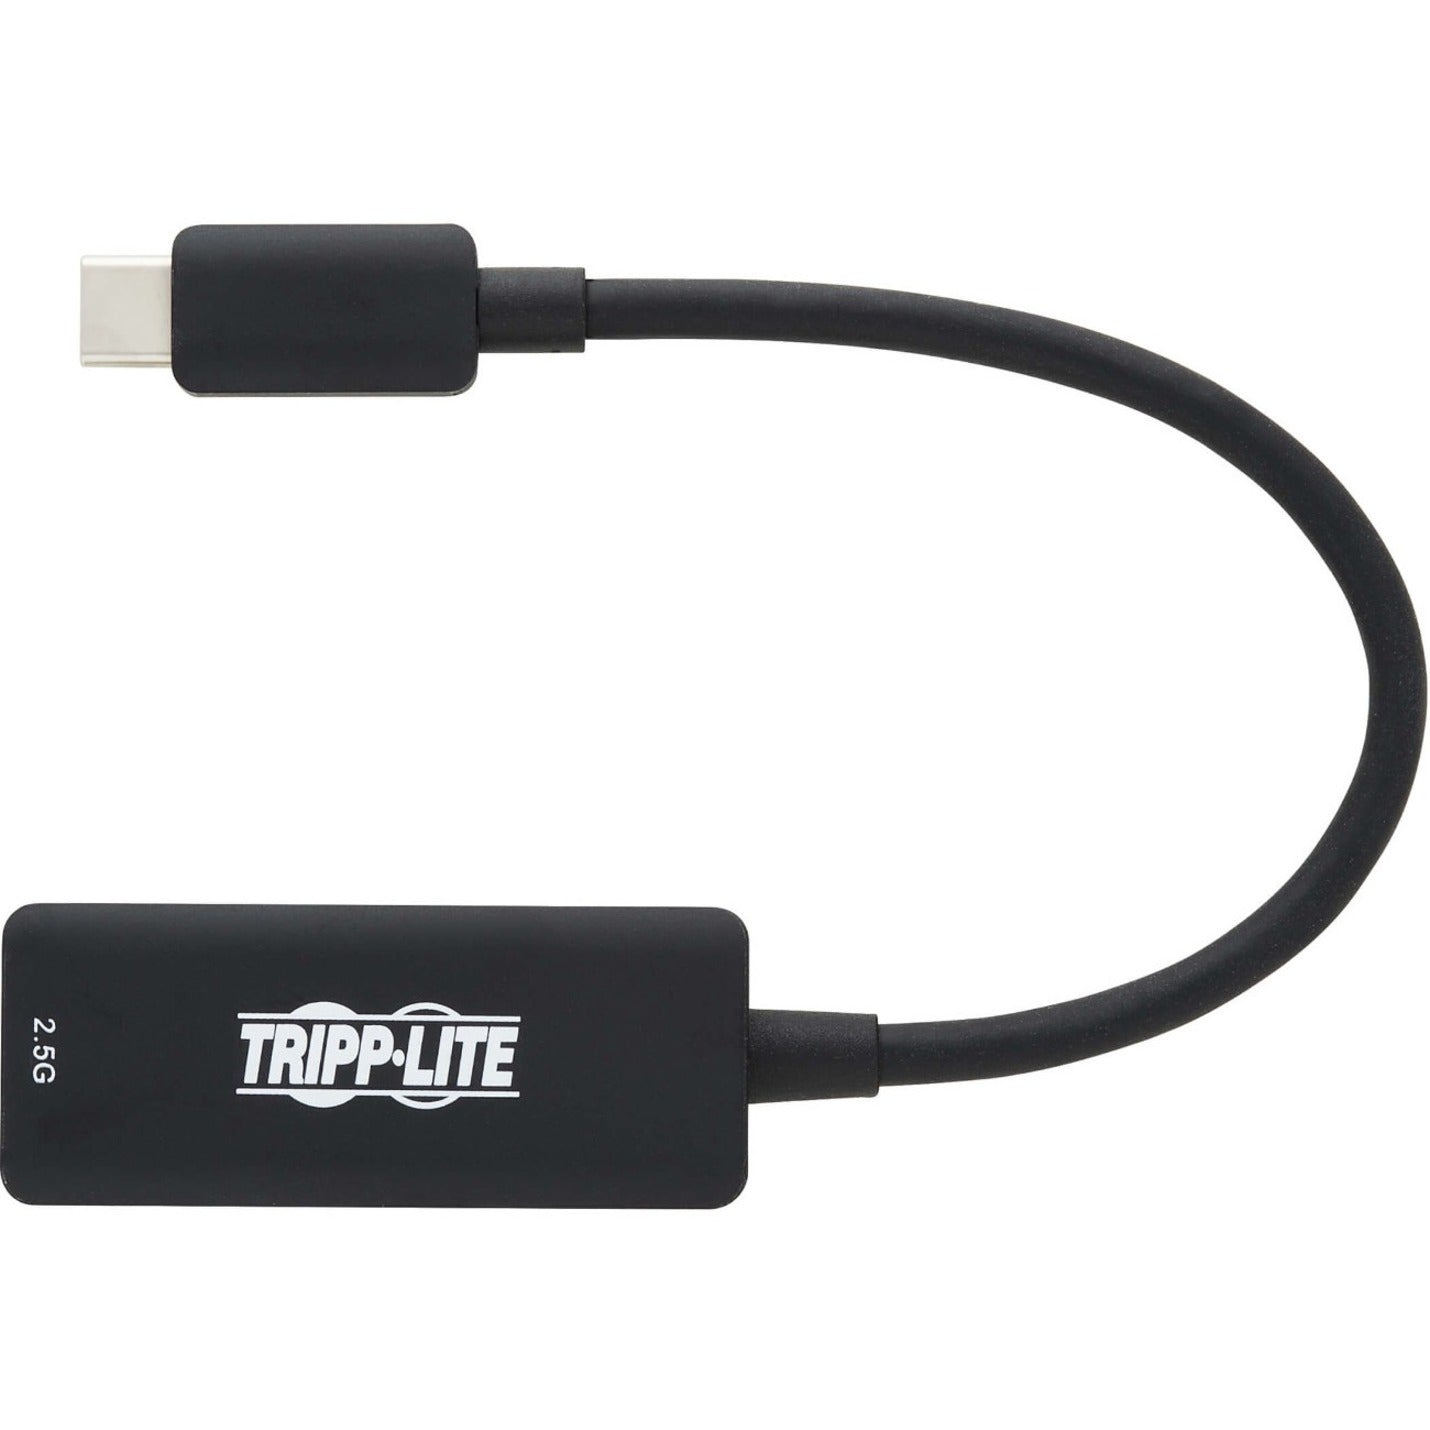 Tripp Lite U436-06N-2P5 Gigabit Ethernet Adapter, USB C to RJ45 Network Adapter, Plug and Play, 320 MB/s Data Transfer Rate